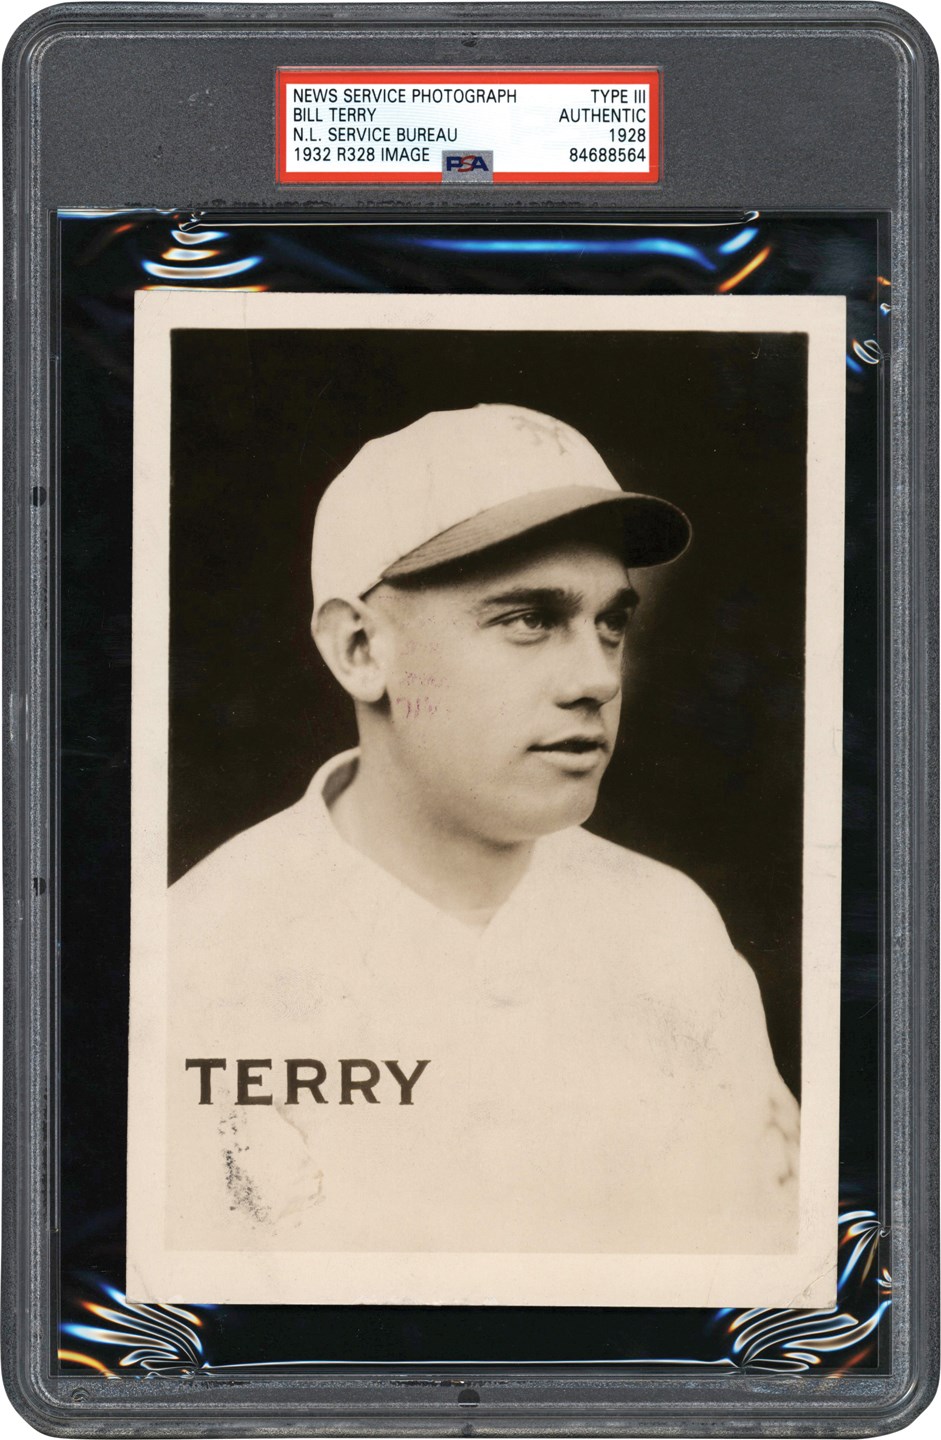 Vintage Sports Photographs - 1928 Bill Terry Photograph Used for 1932 R328 U.S. Caramel Card (PSA Type III)